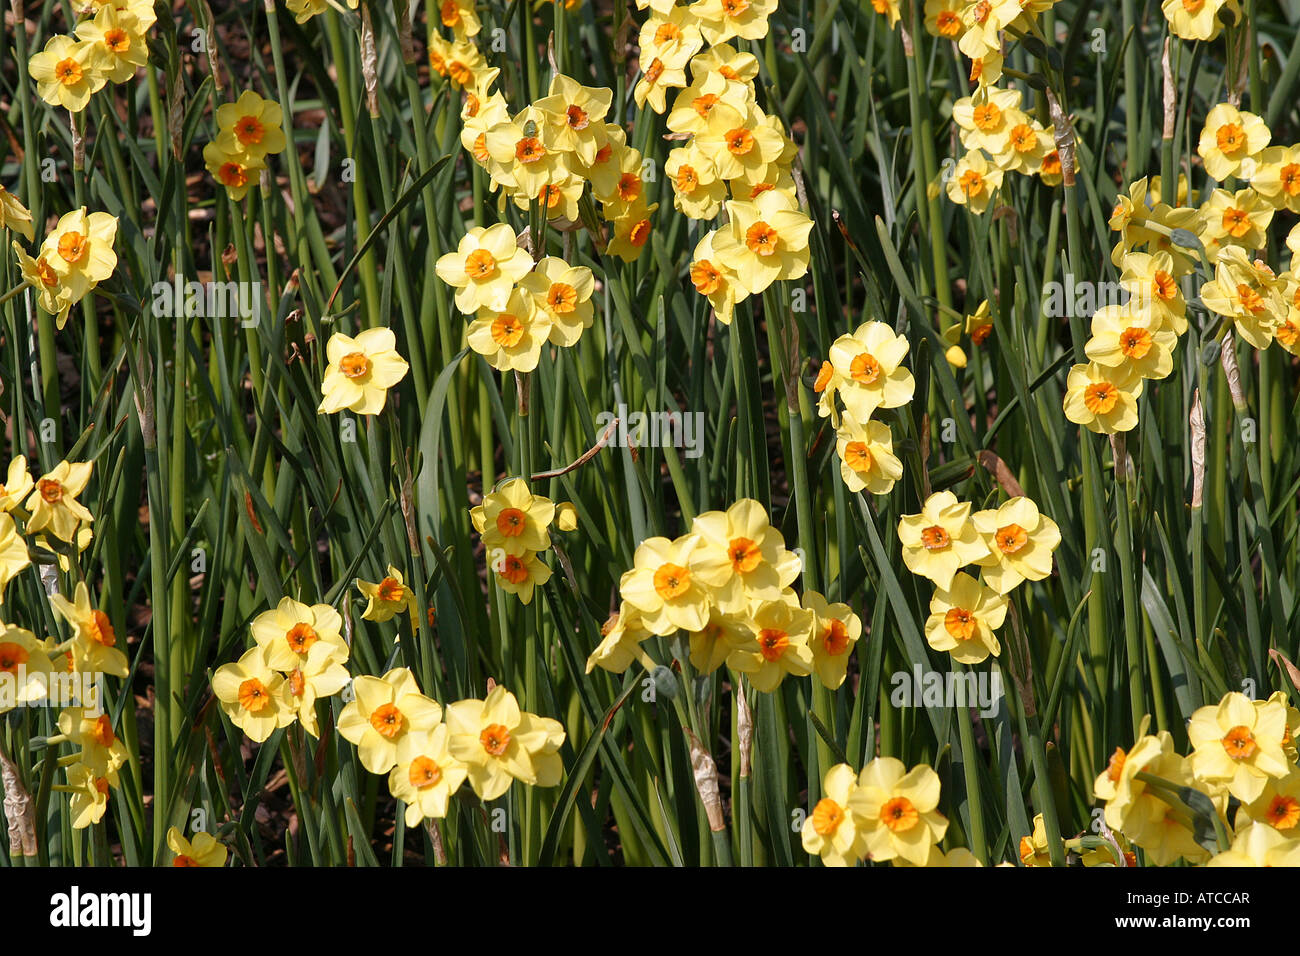 Daffodil daffodils flower  Head on yellow petals St david's day Wales  Jonquille narcisse welsh  Daffodils 31282 Stock Photo